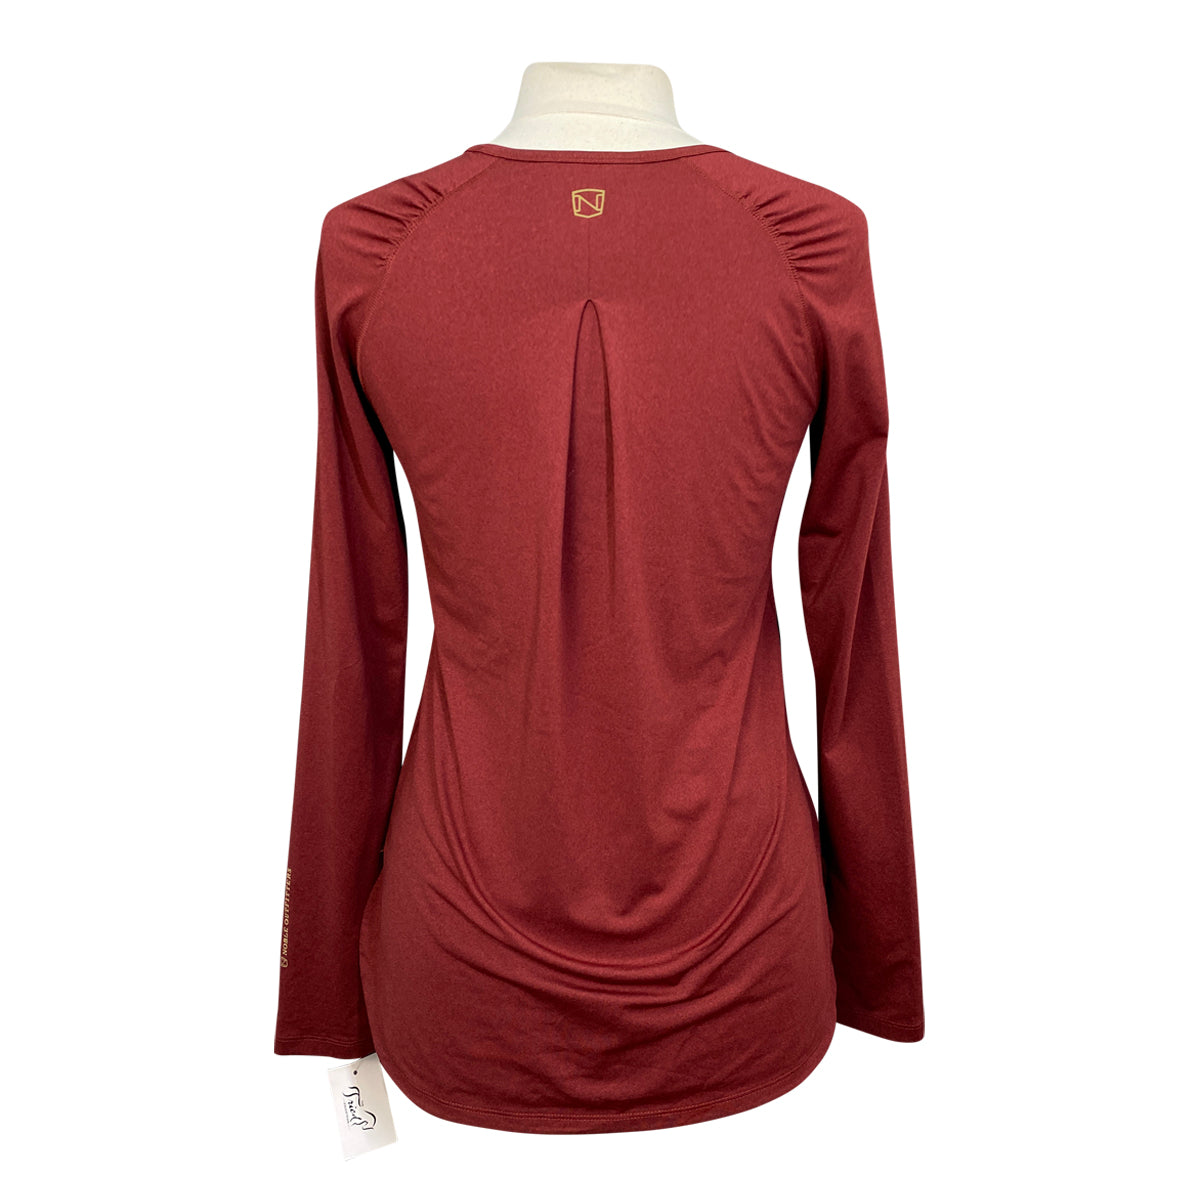 Noble Outfitters Long Sleeve Crew Training Shirt in Burgundy